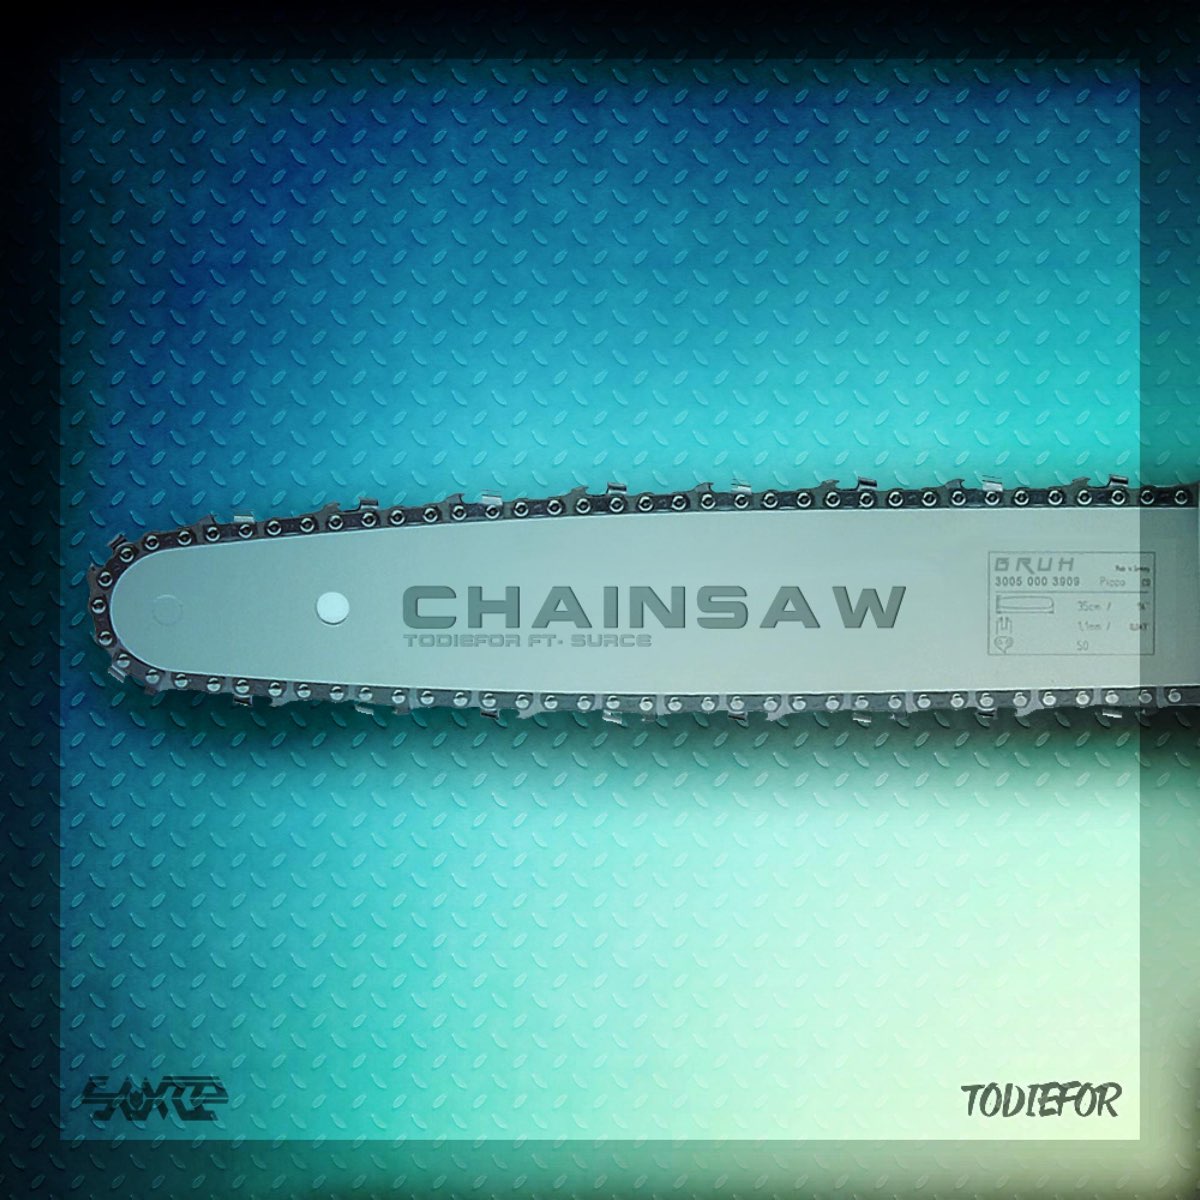 Текст пилы 1. TODIEFOR. Chainsaw текст.